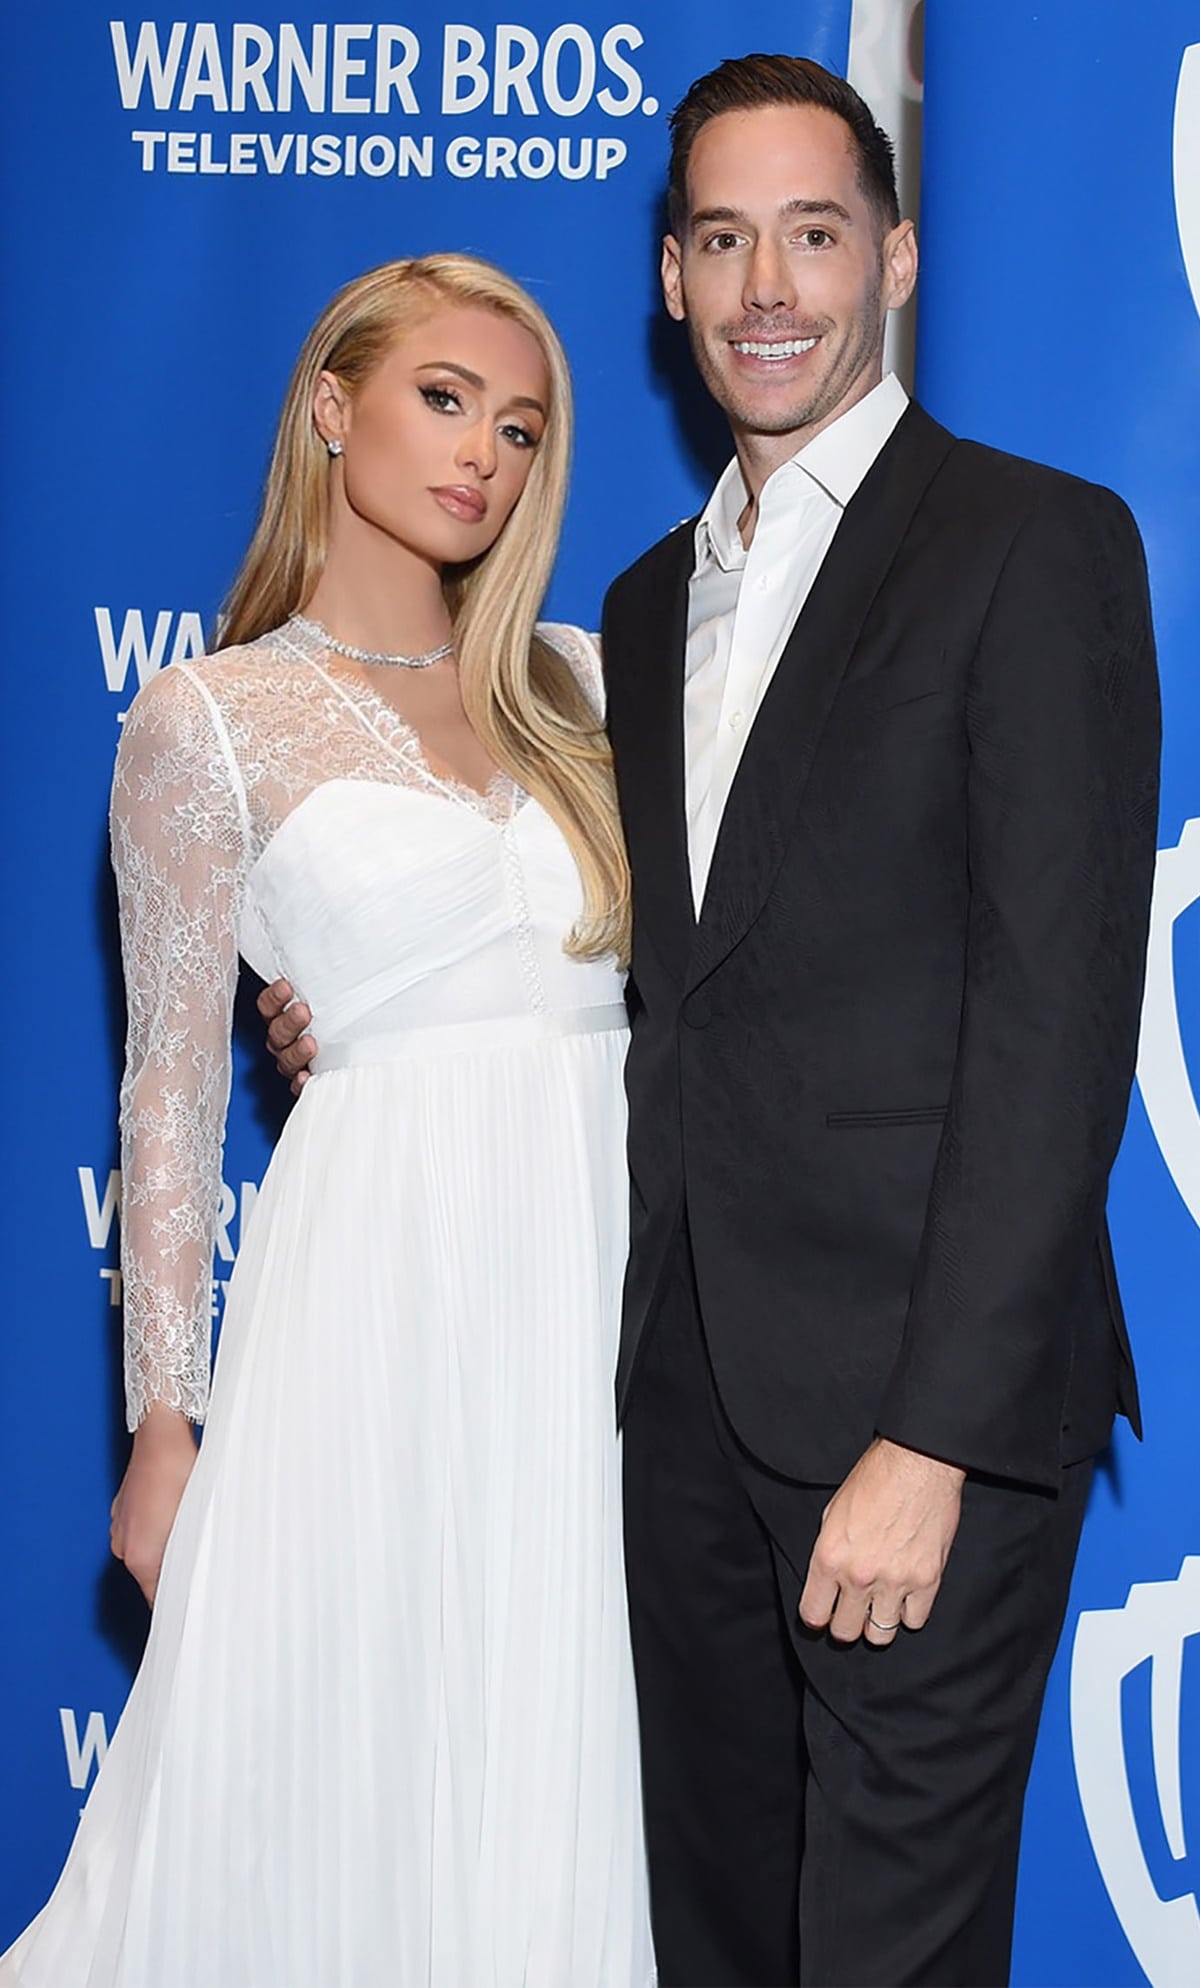 Although the details of their first meeting in their twenties remain unknown, Paris Hilton and Carter Reum reconnected in 2019 when Reum's sister, Halle Hammond, invited them both to Thanksgiving dinner, which led to their instant connection and incredible chemistry, with Hilton revealing that she has known Reum for 15 years and that they have not spent a night apart since their first date